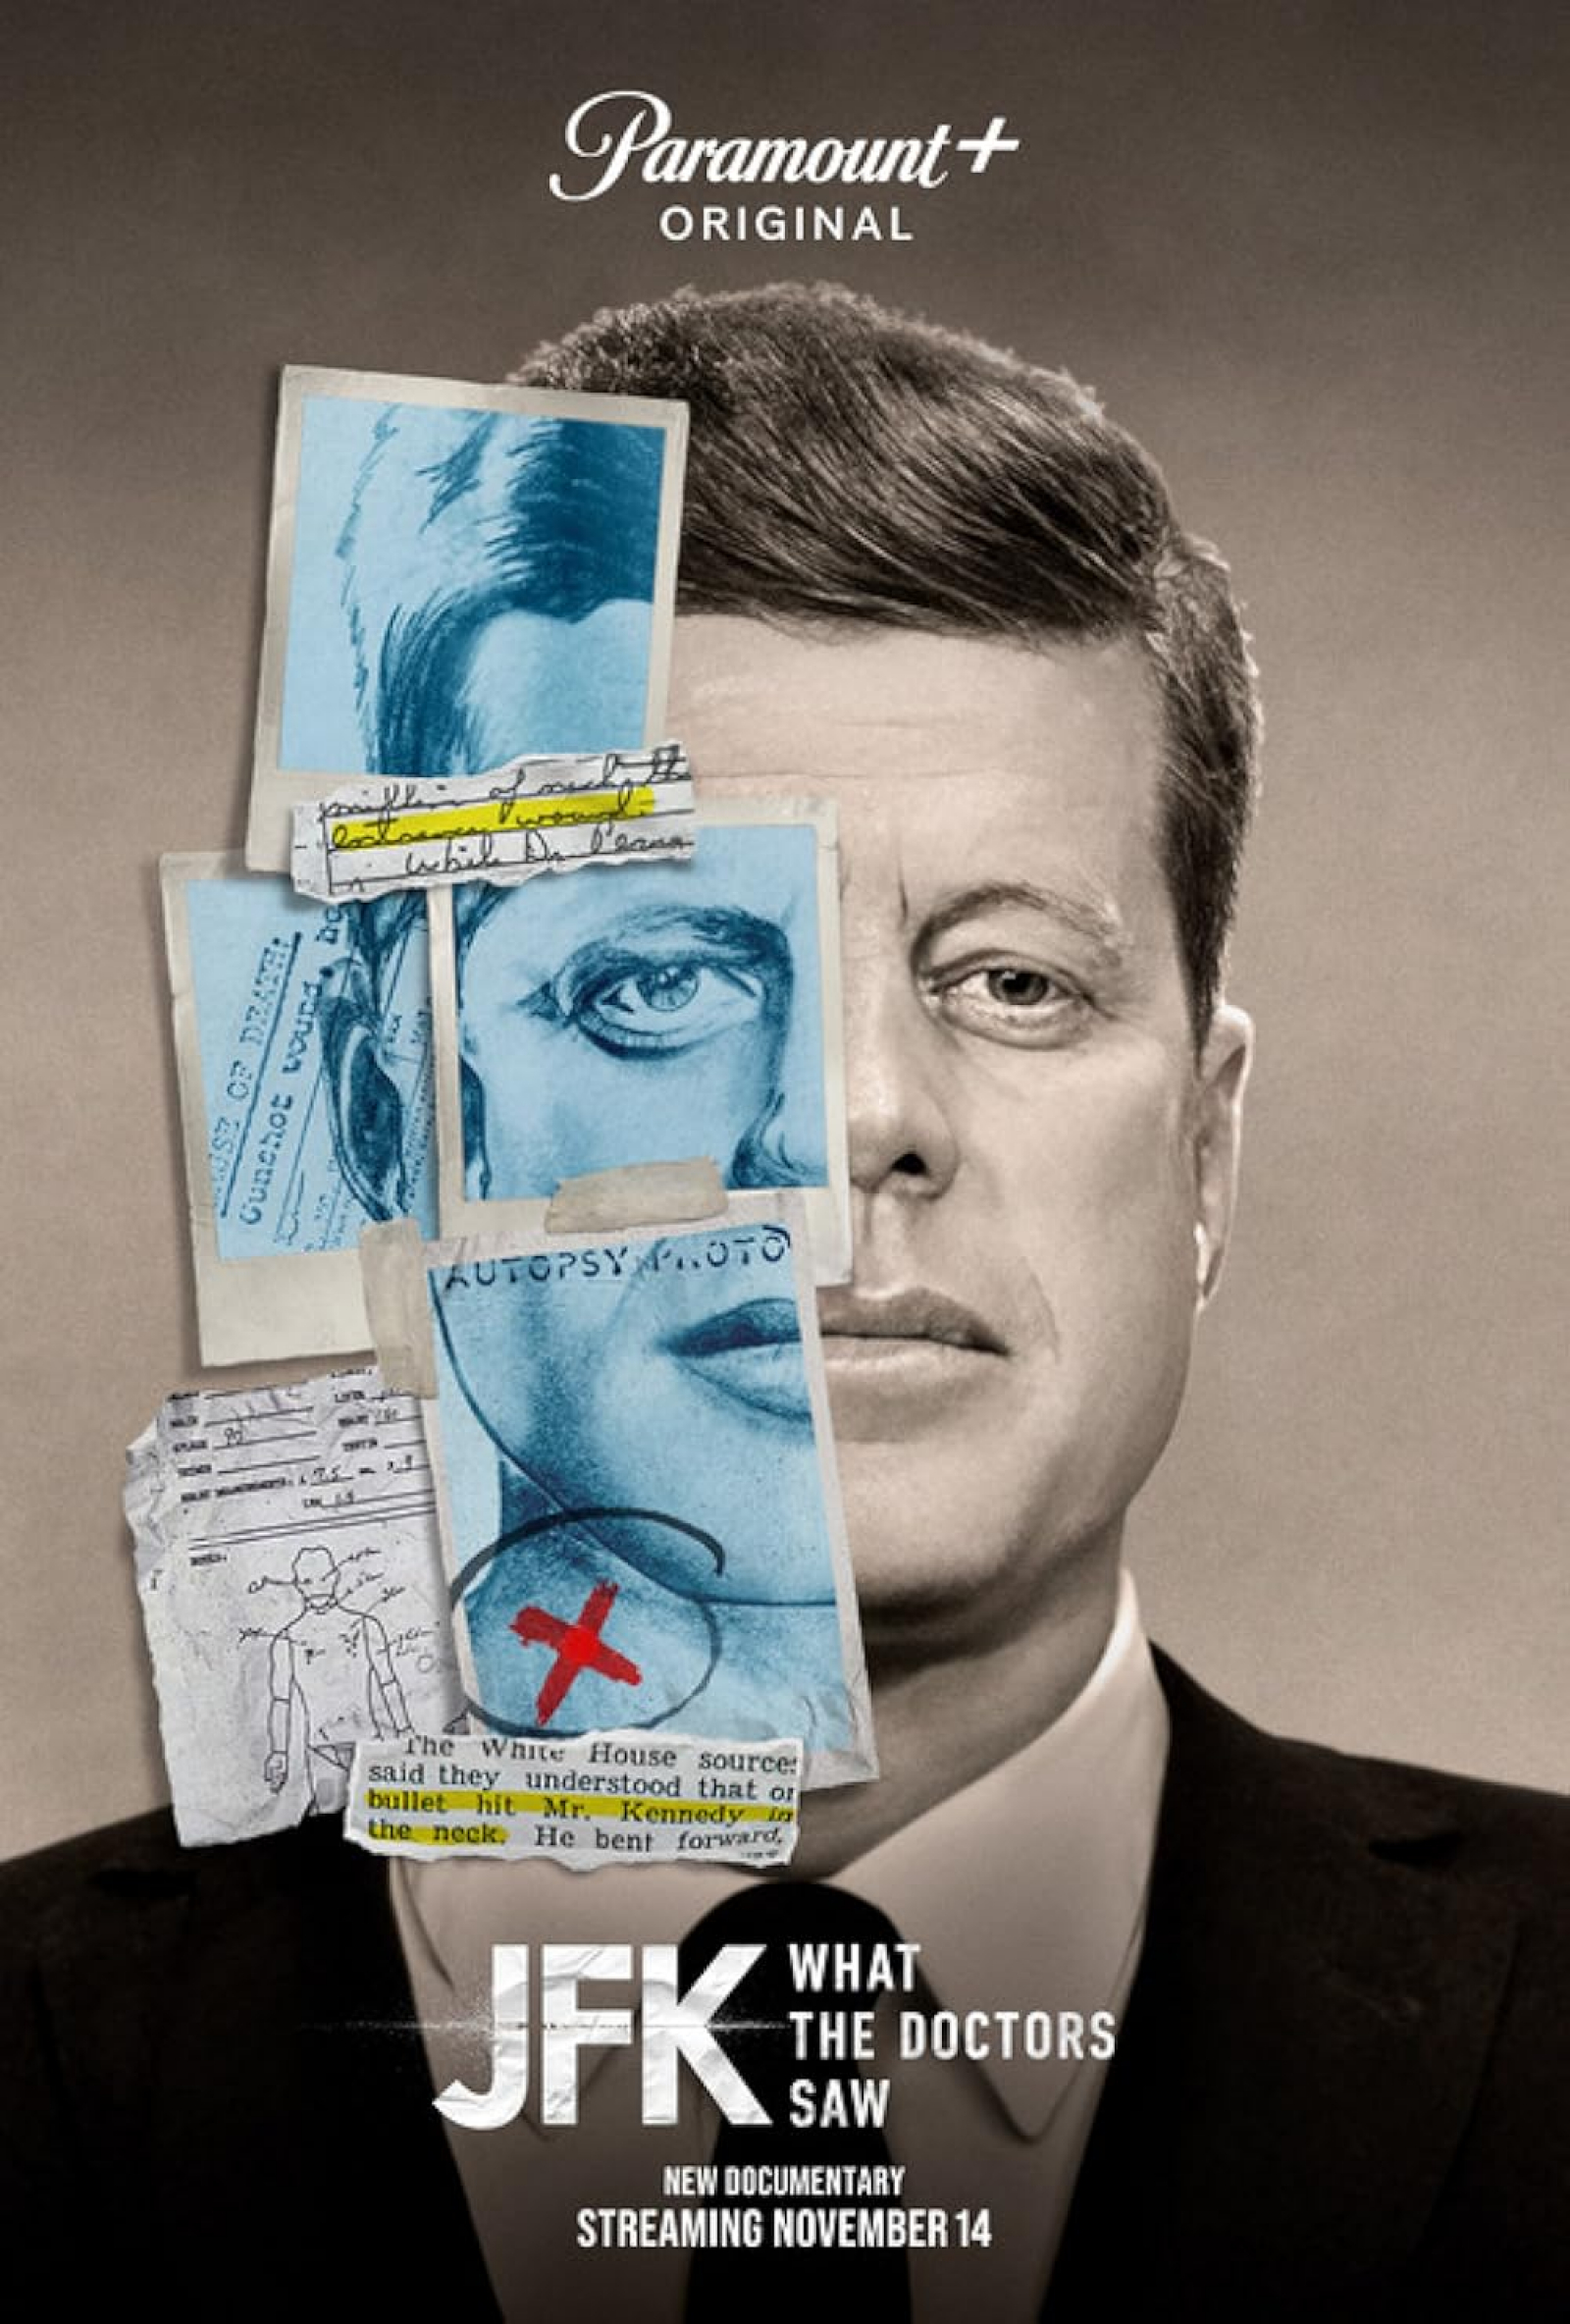 JFK: What the Doctors Saw - An Important Addition, and a Missed Opportunity